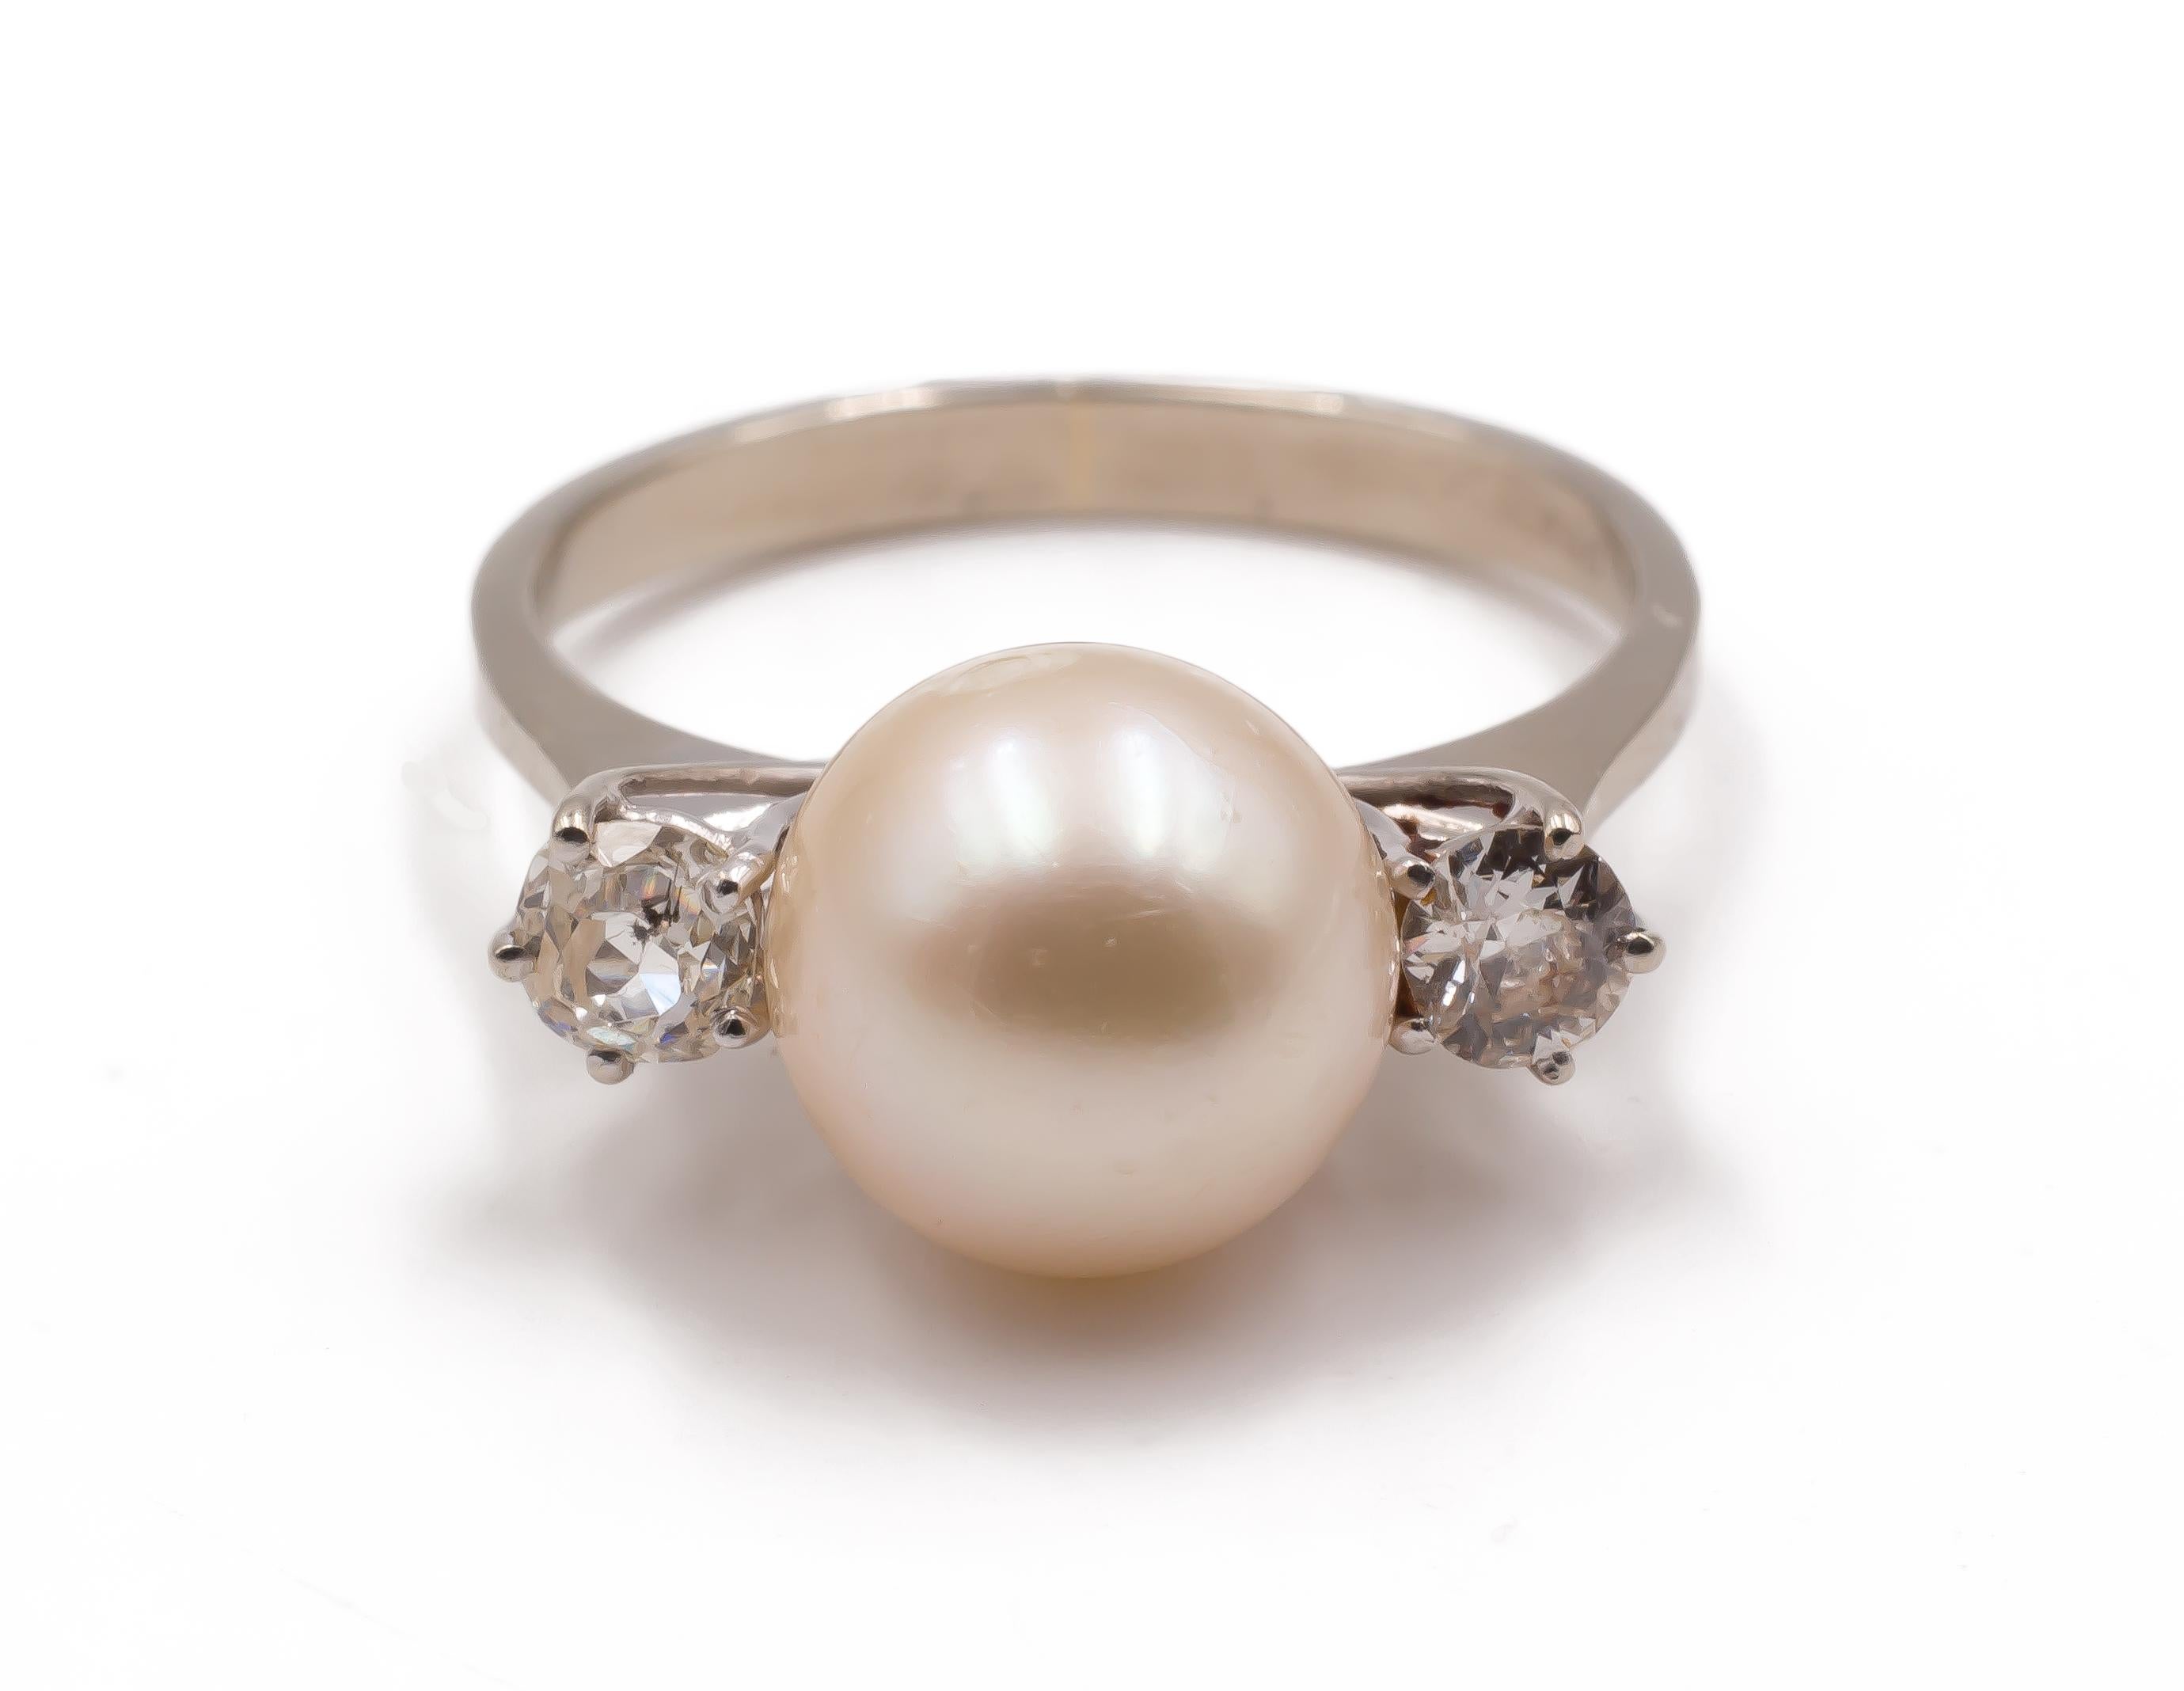 Women's Vintage White Gold, Pearl and 0.4 Carat Diamond Ring, 1950s